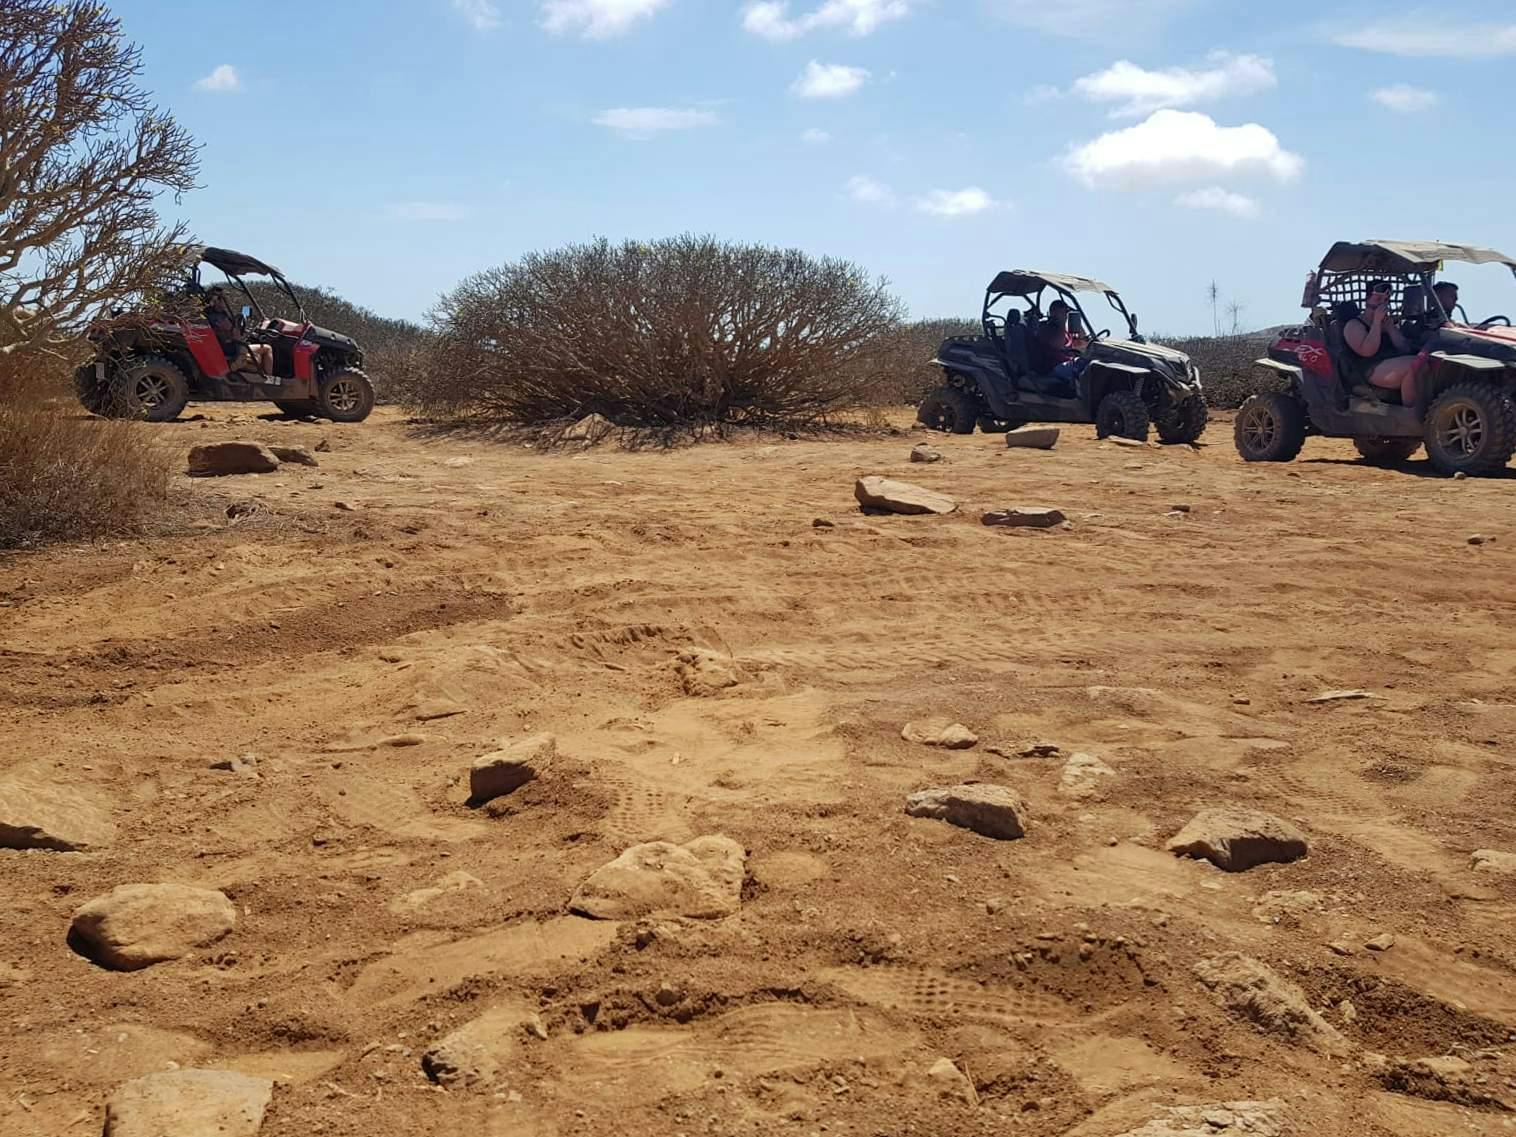 Gran Canaria Buggy and Quad Tours